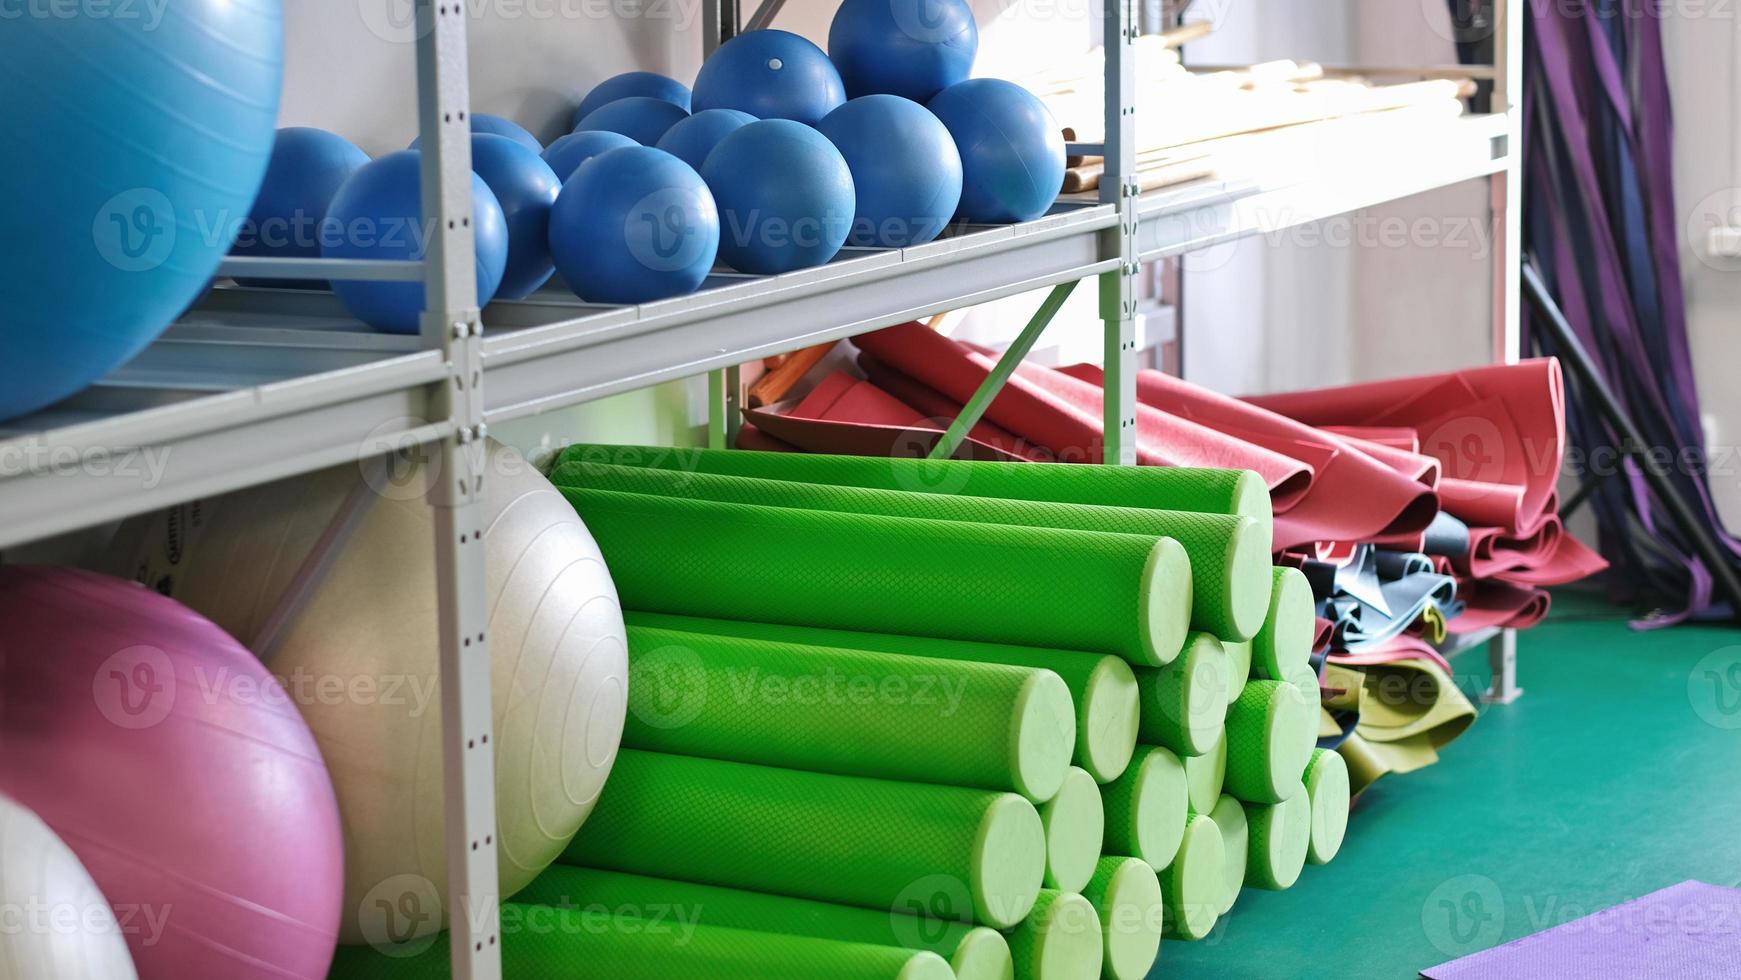 yoga and pilates equipment in a gym, fitballs, foam roller, mats for fitness and stretching practice, wellness and self care. sport club interior photo